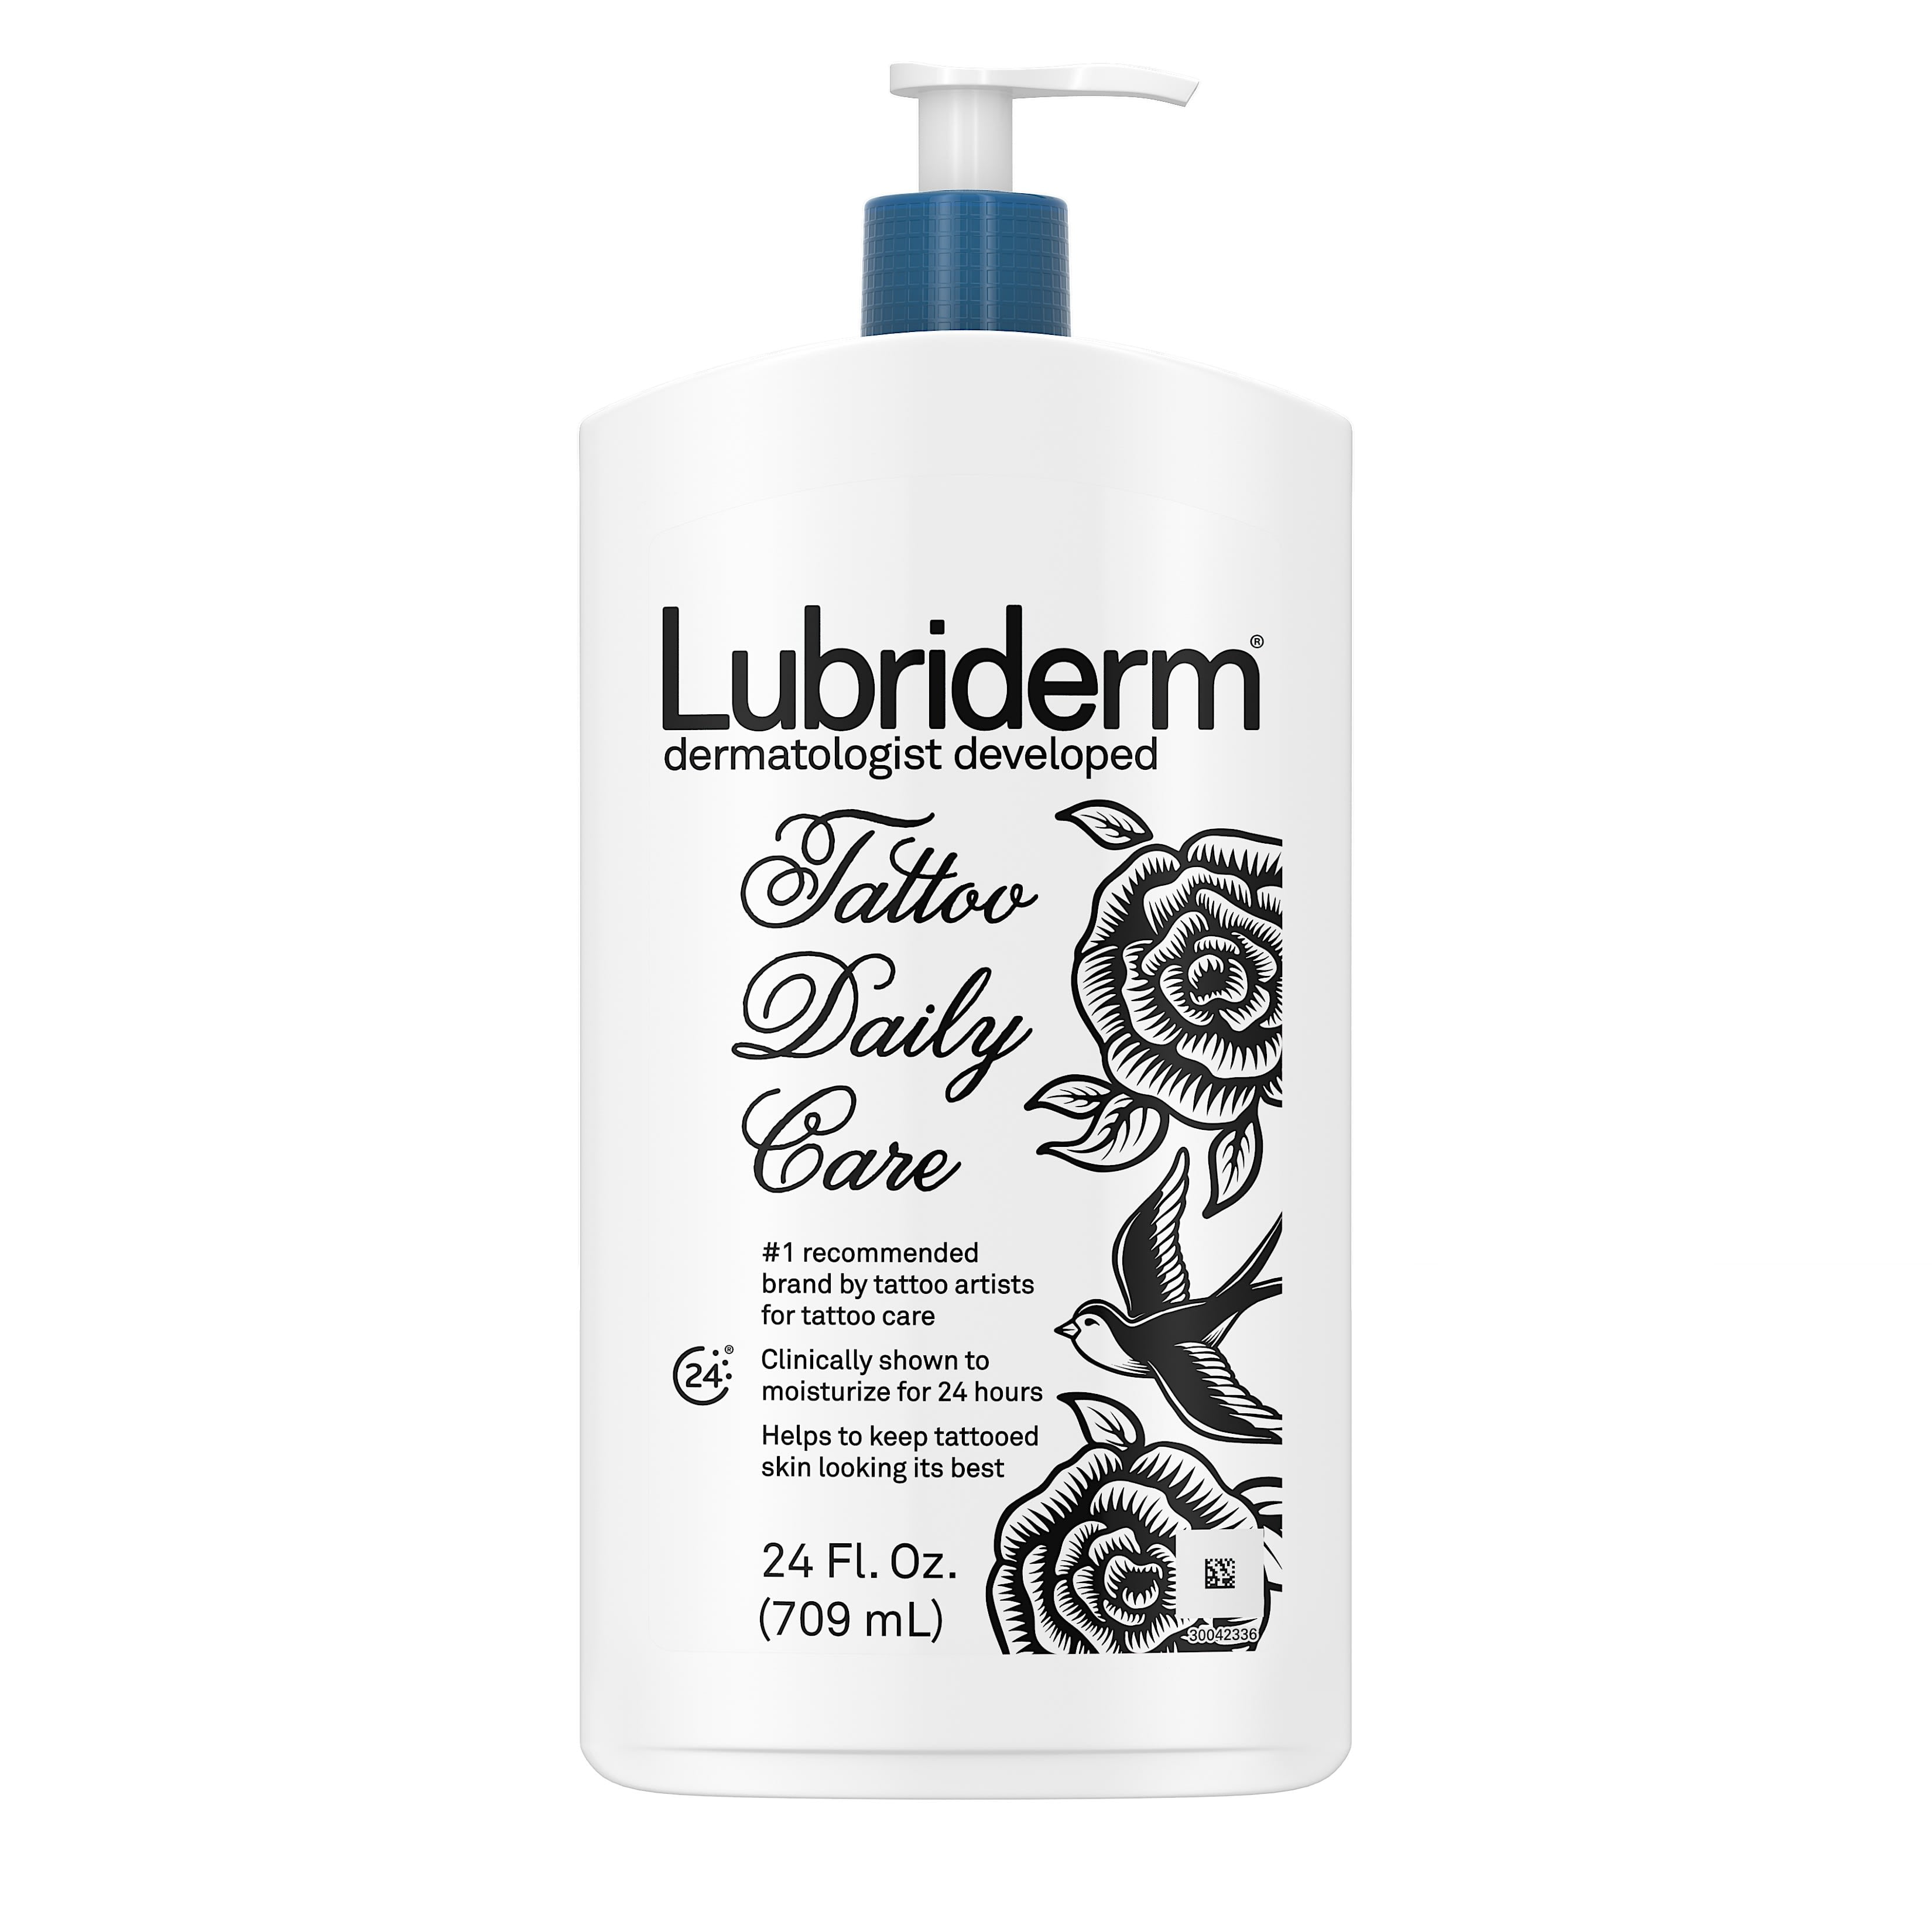 Lubriderm unscented lotion for tattoos